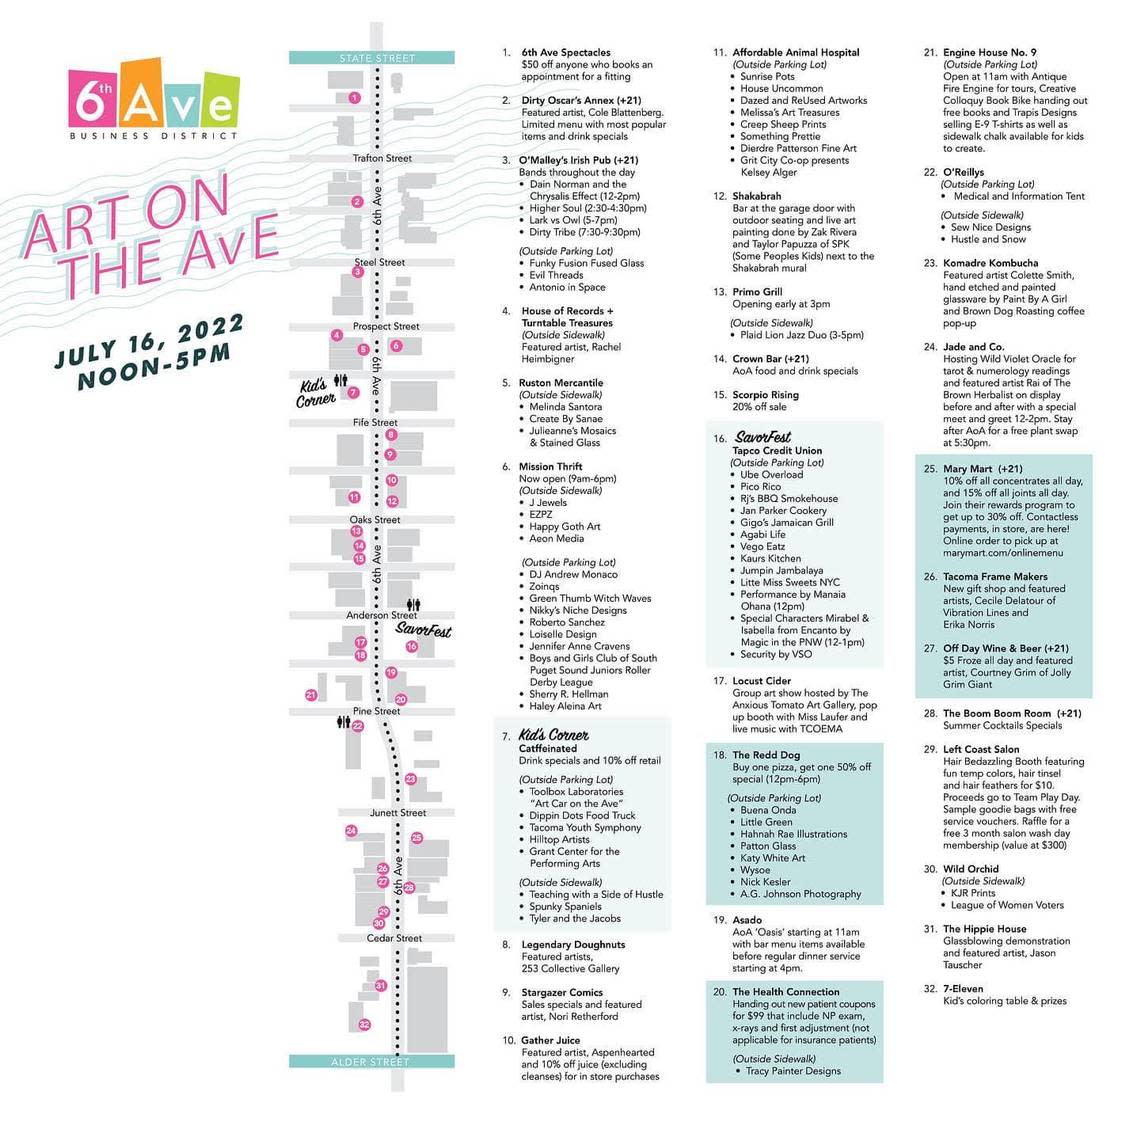 Official guide to Art on the Ave 2022, plus Savor Fest in the TAPCO parking lot.